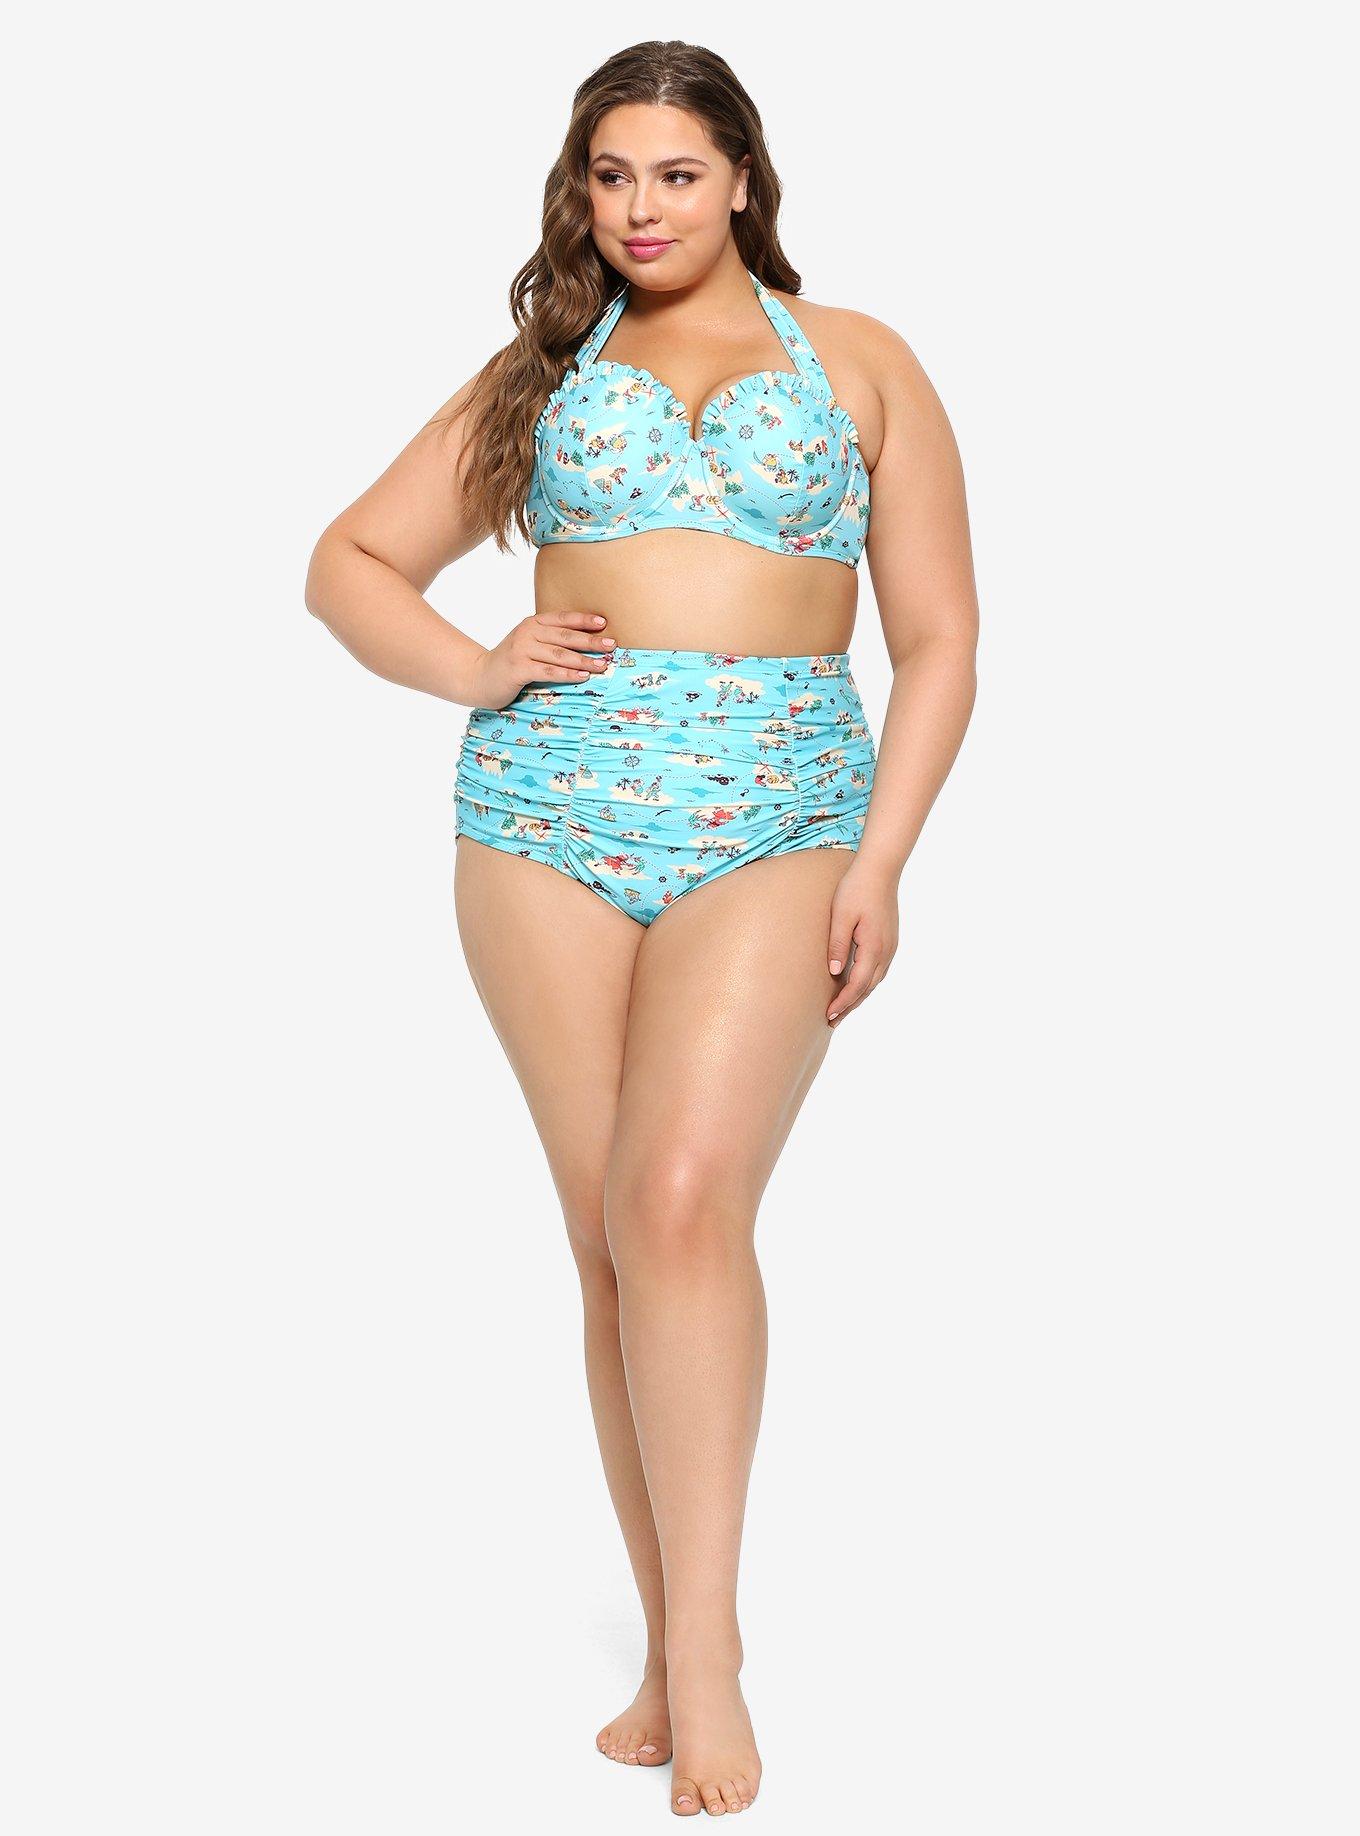 Disney Peter Pan Never Land Map High-Waisted Ruched Swim Bottoms Plus Size, MULTI, alternate